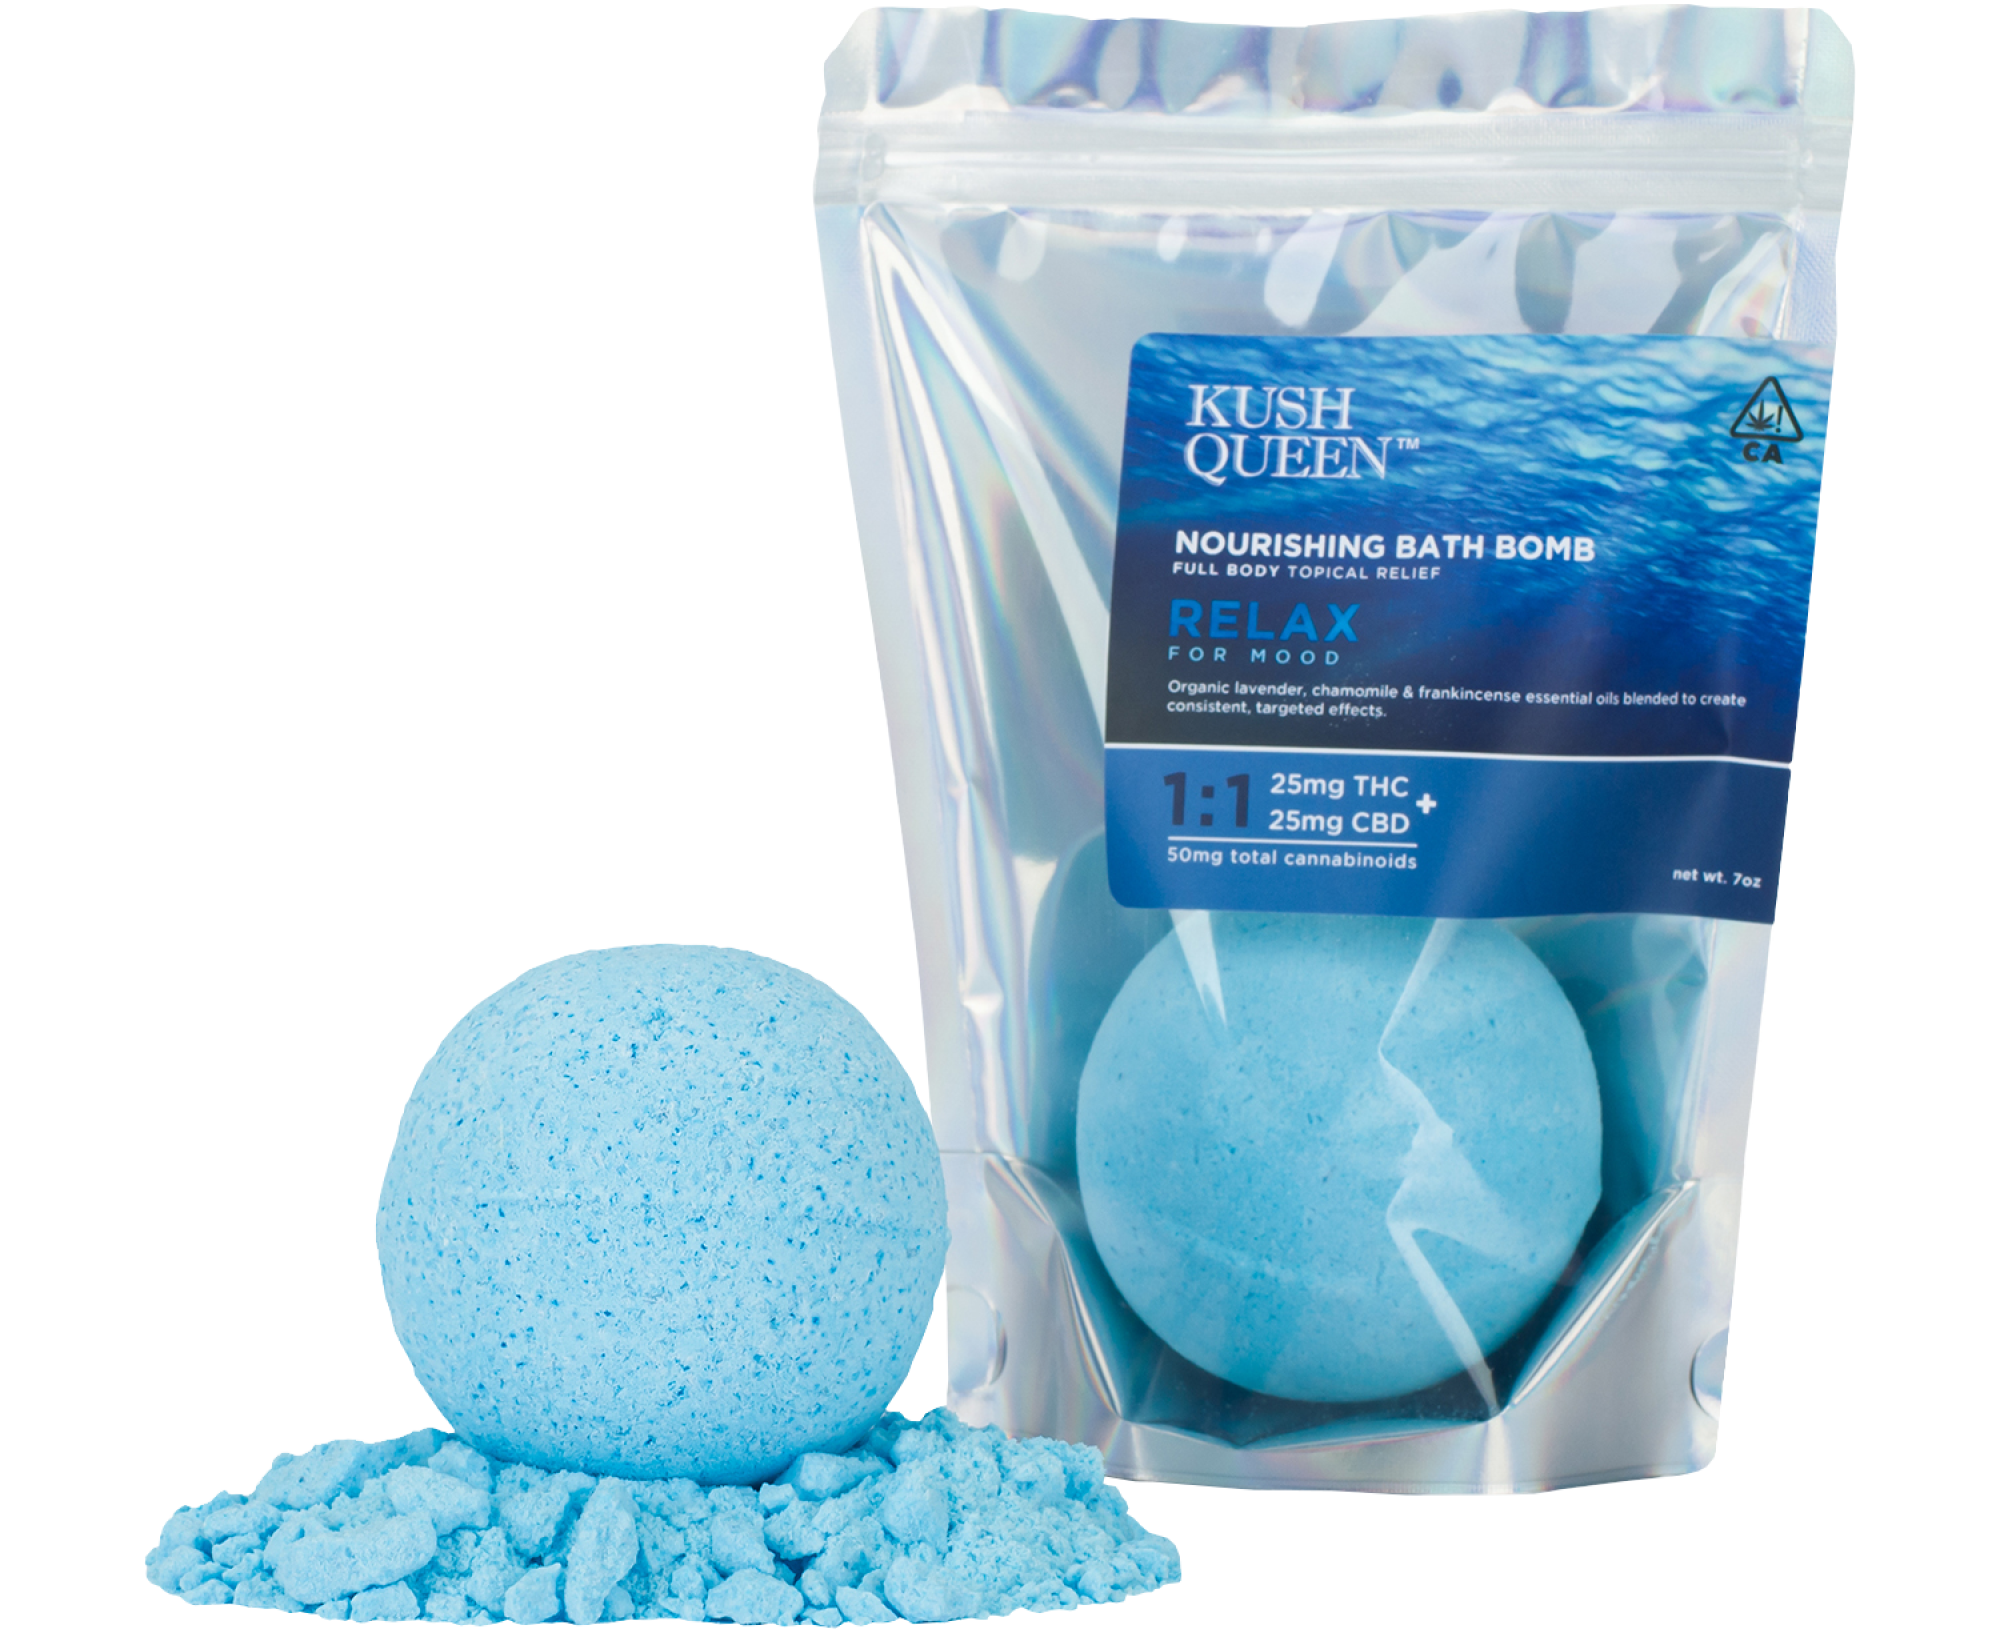 Kush Queen's blue Relax bath bomb with CBD and THC